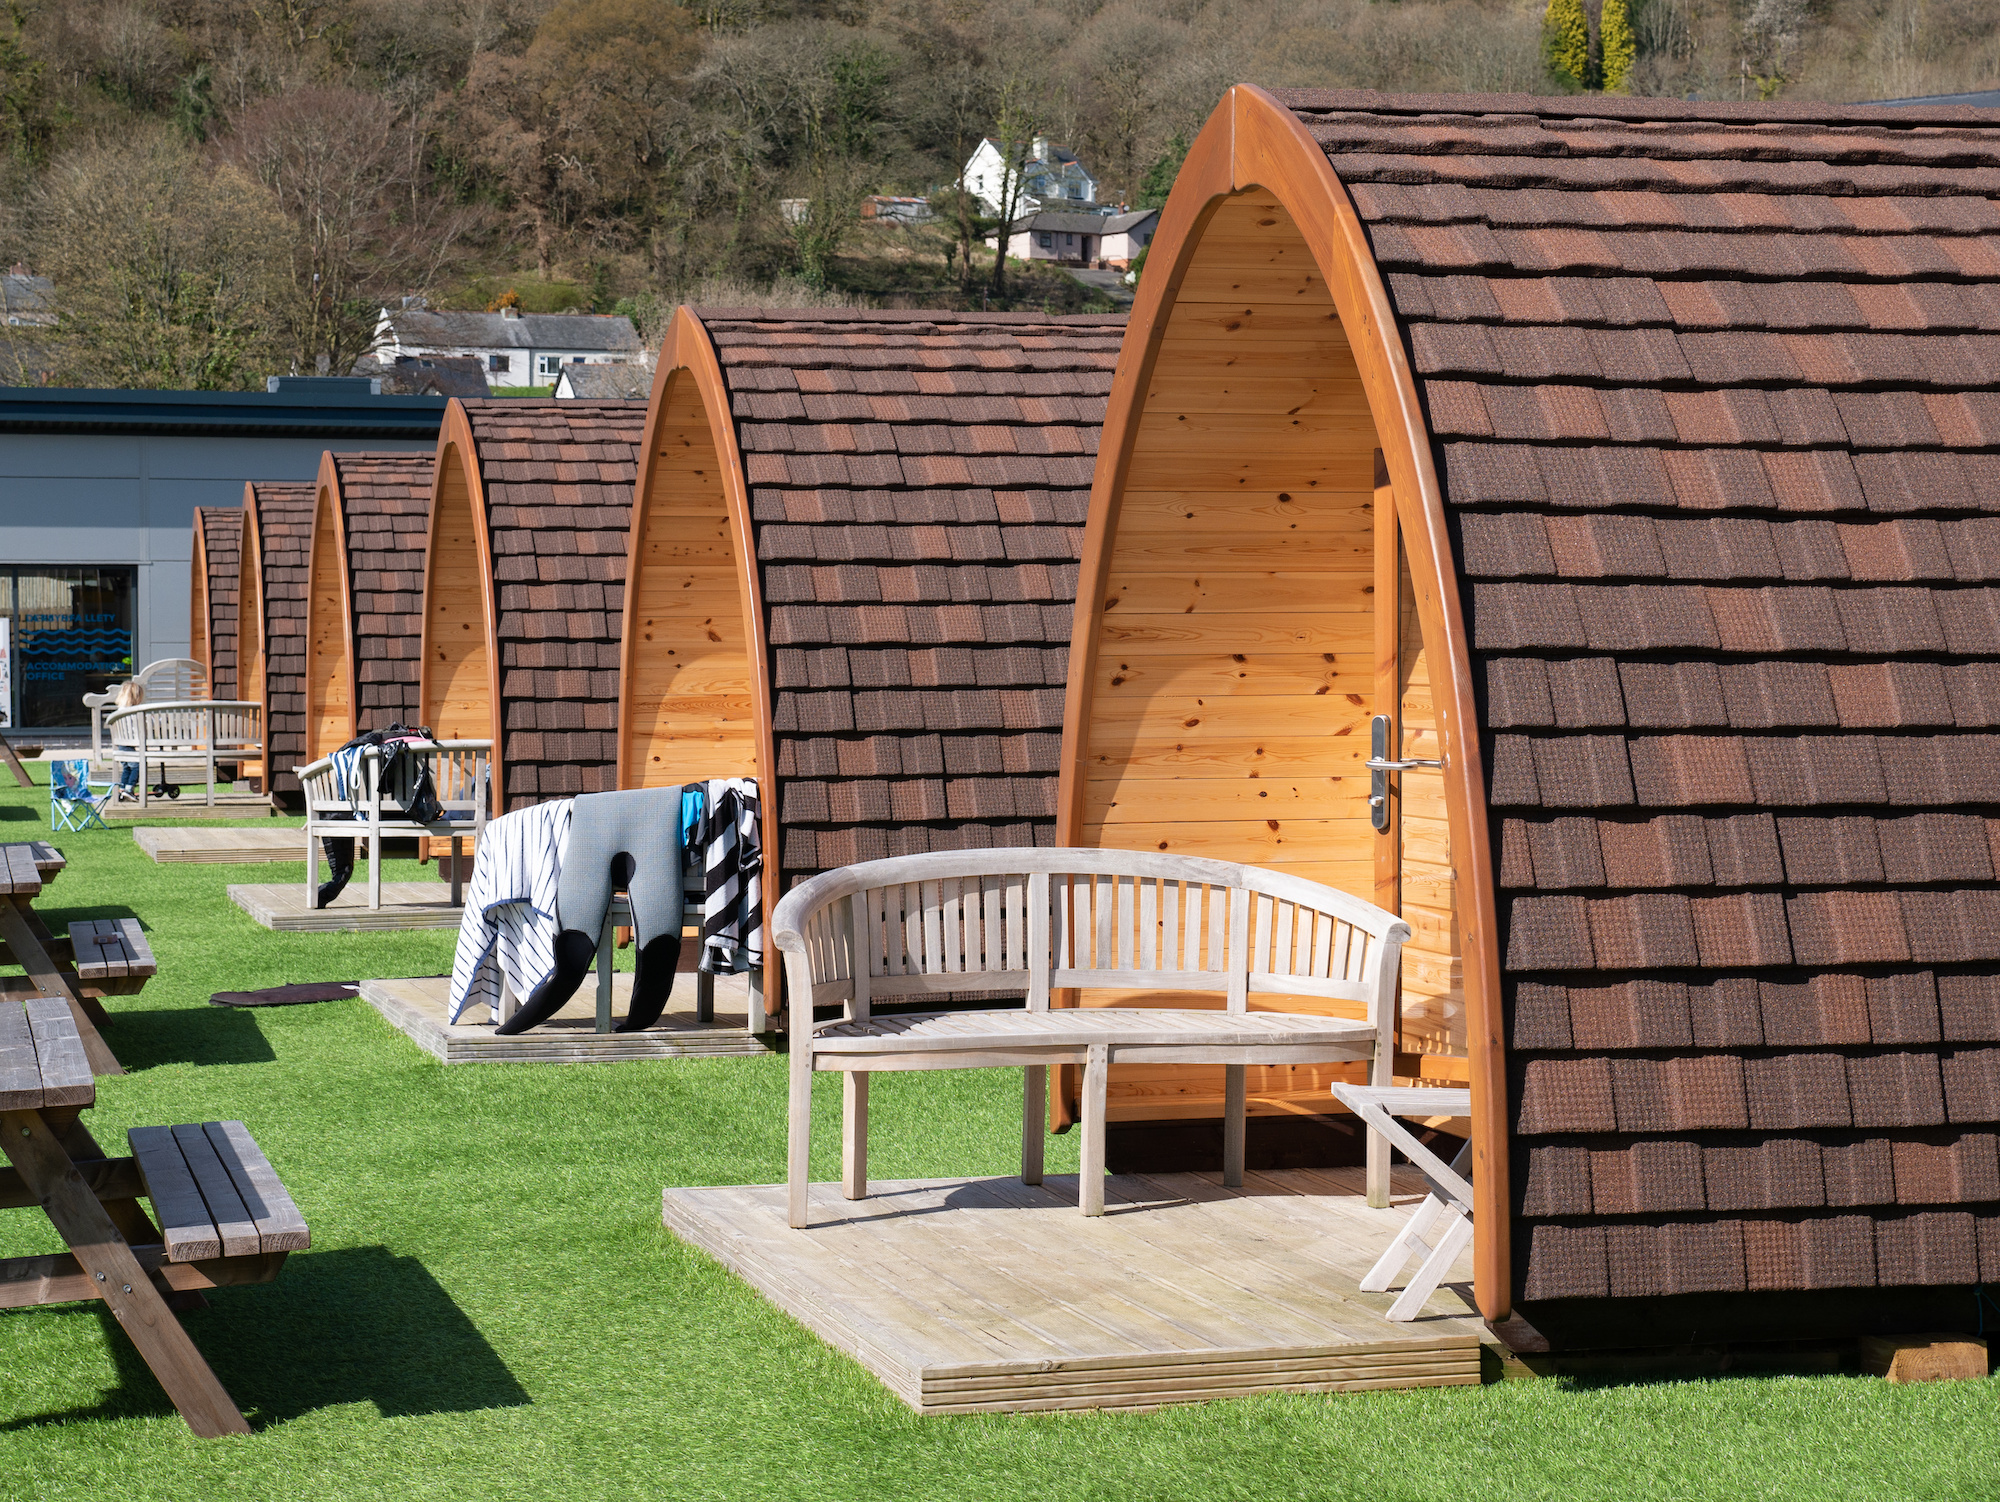 A Comprehensive Beginner's Guide to Glamping in the UK